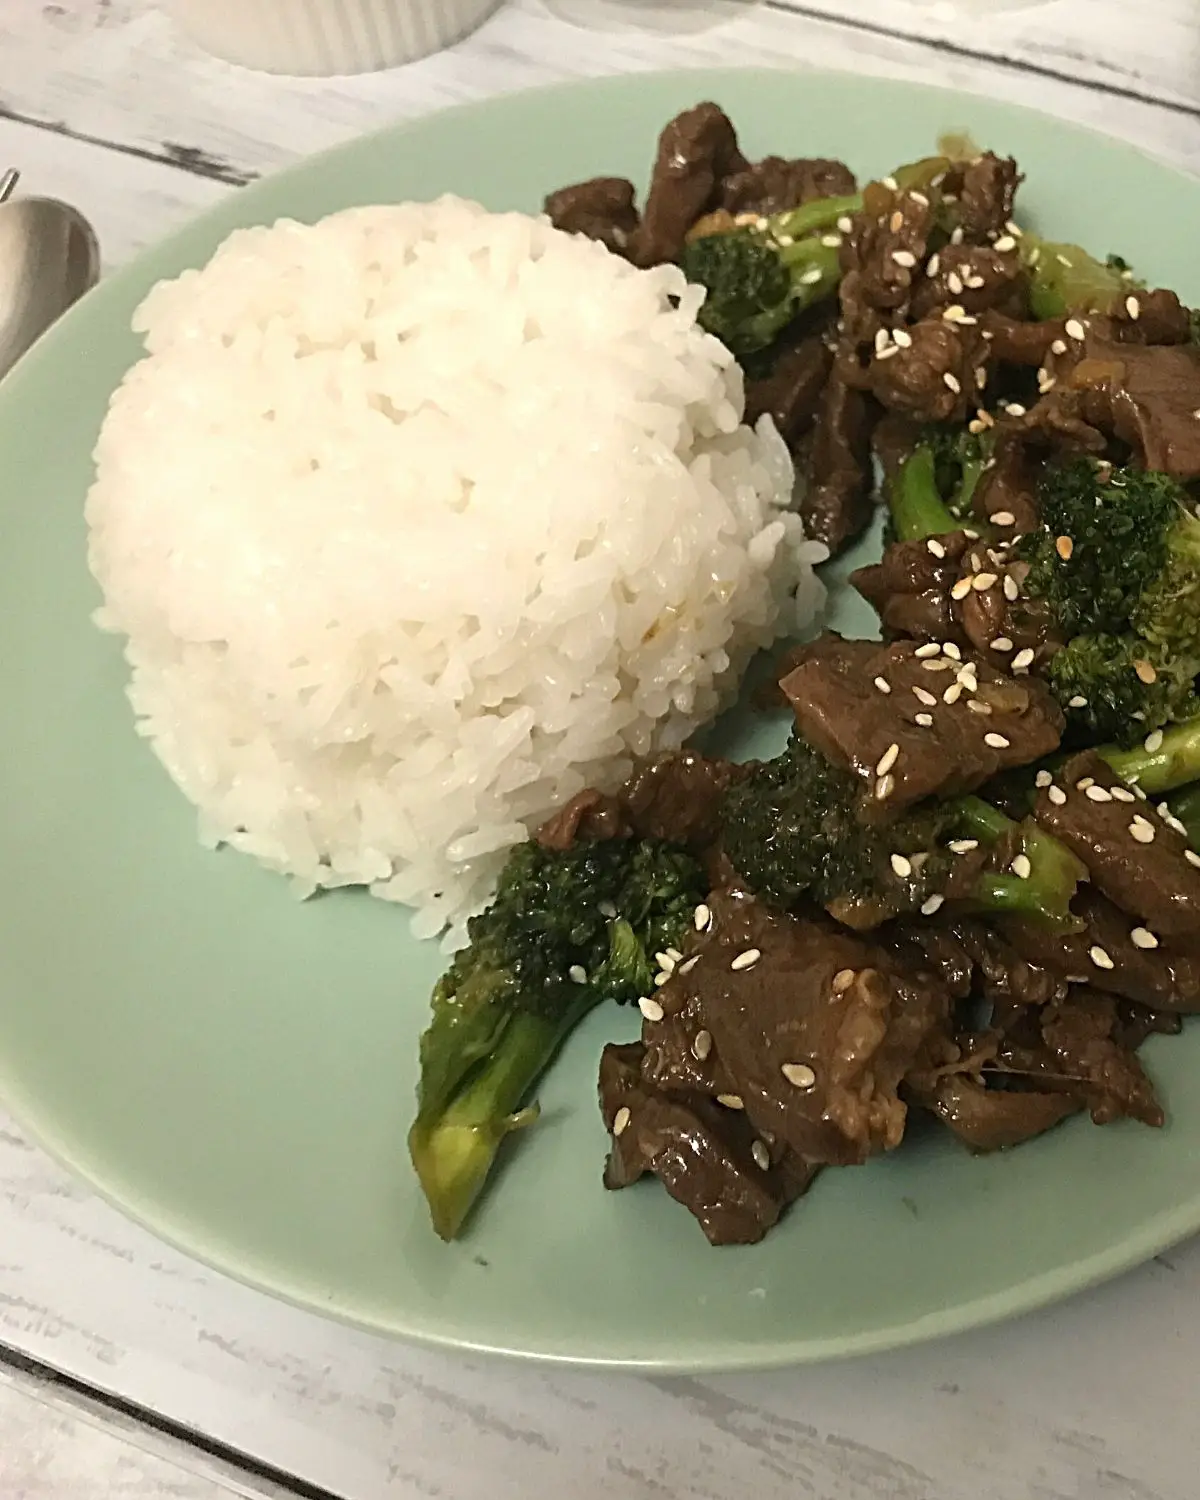 beef with broccoli served with rice in a green round plate